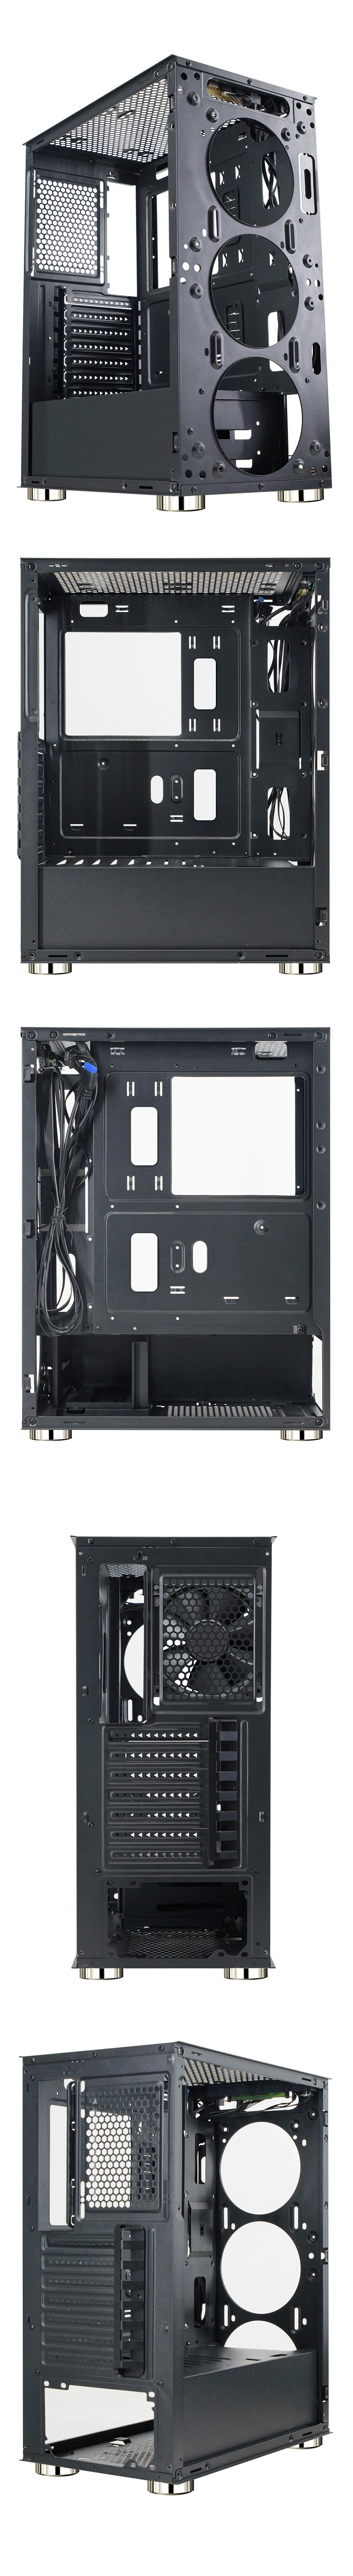 Y01 Full Tower PC Gaming Case Computer Case for ATX